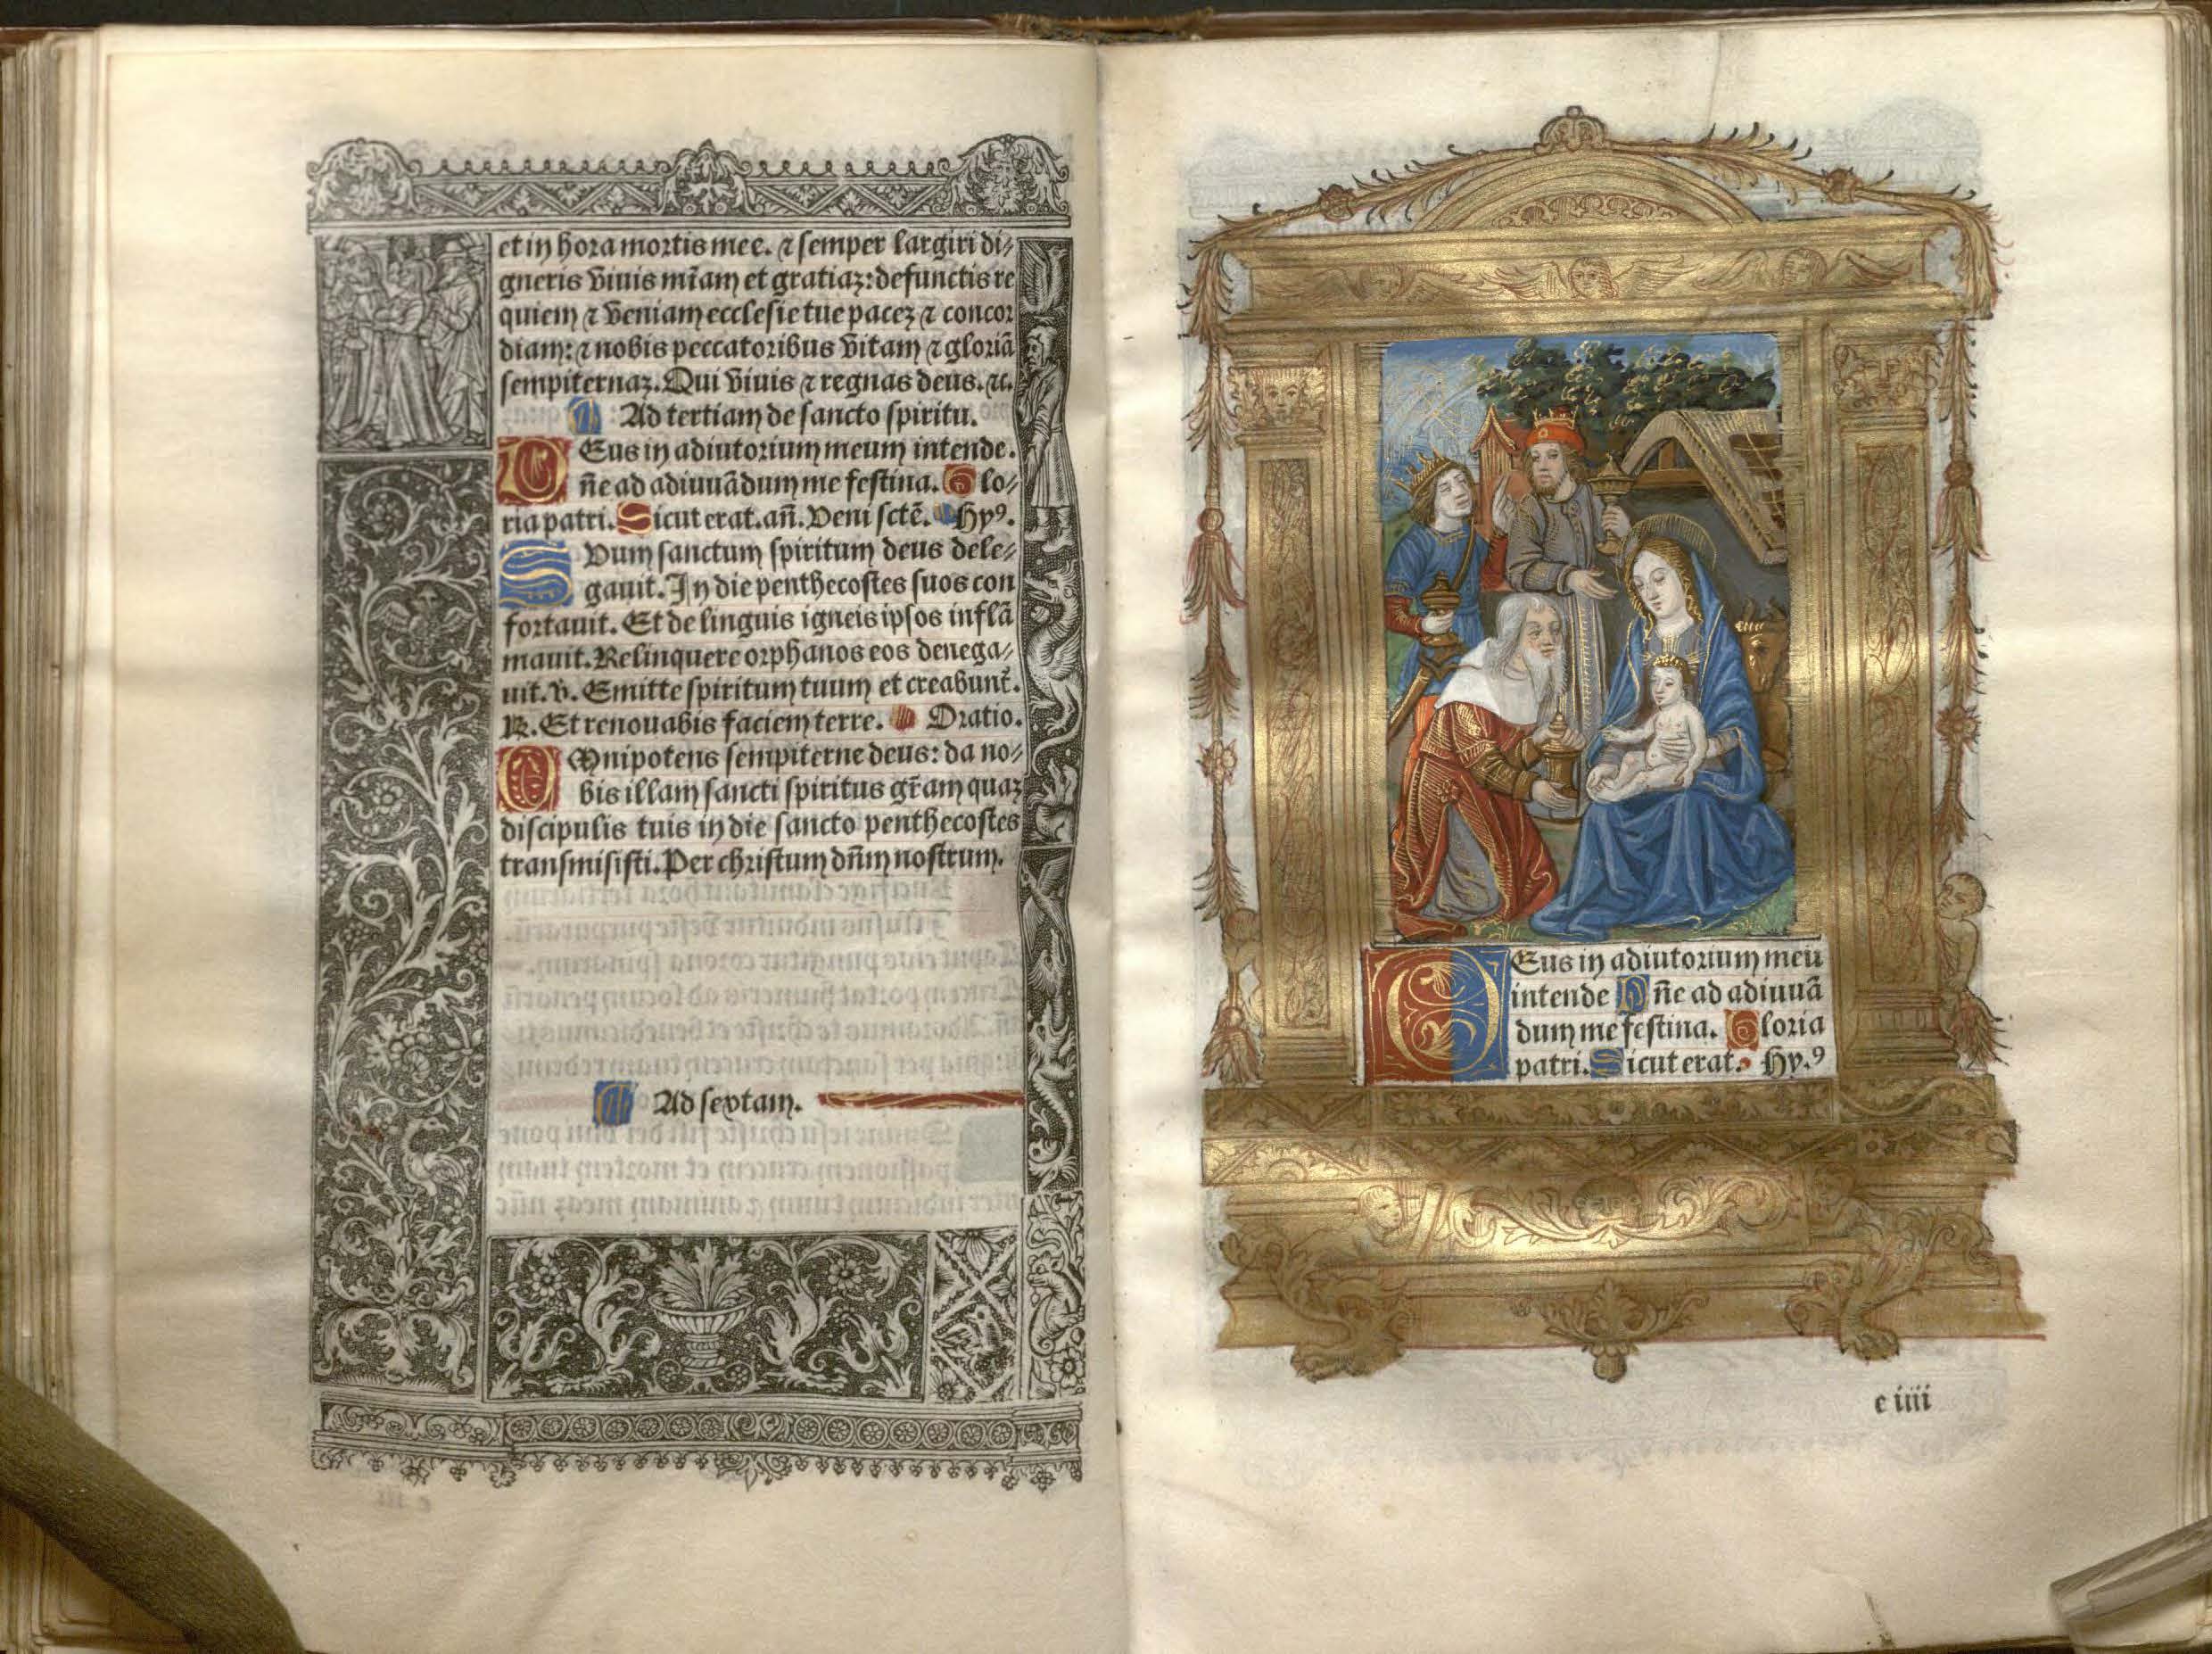 Image of an Opening featuring a miniature of the Adoration of the Magi in a Printed Book of Hours, ca. 1505.